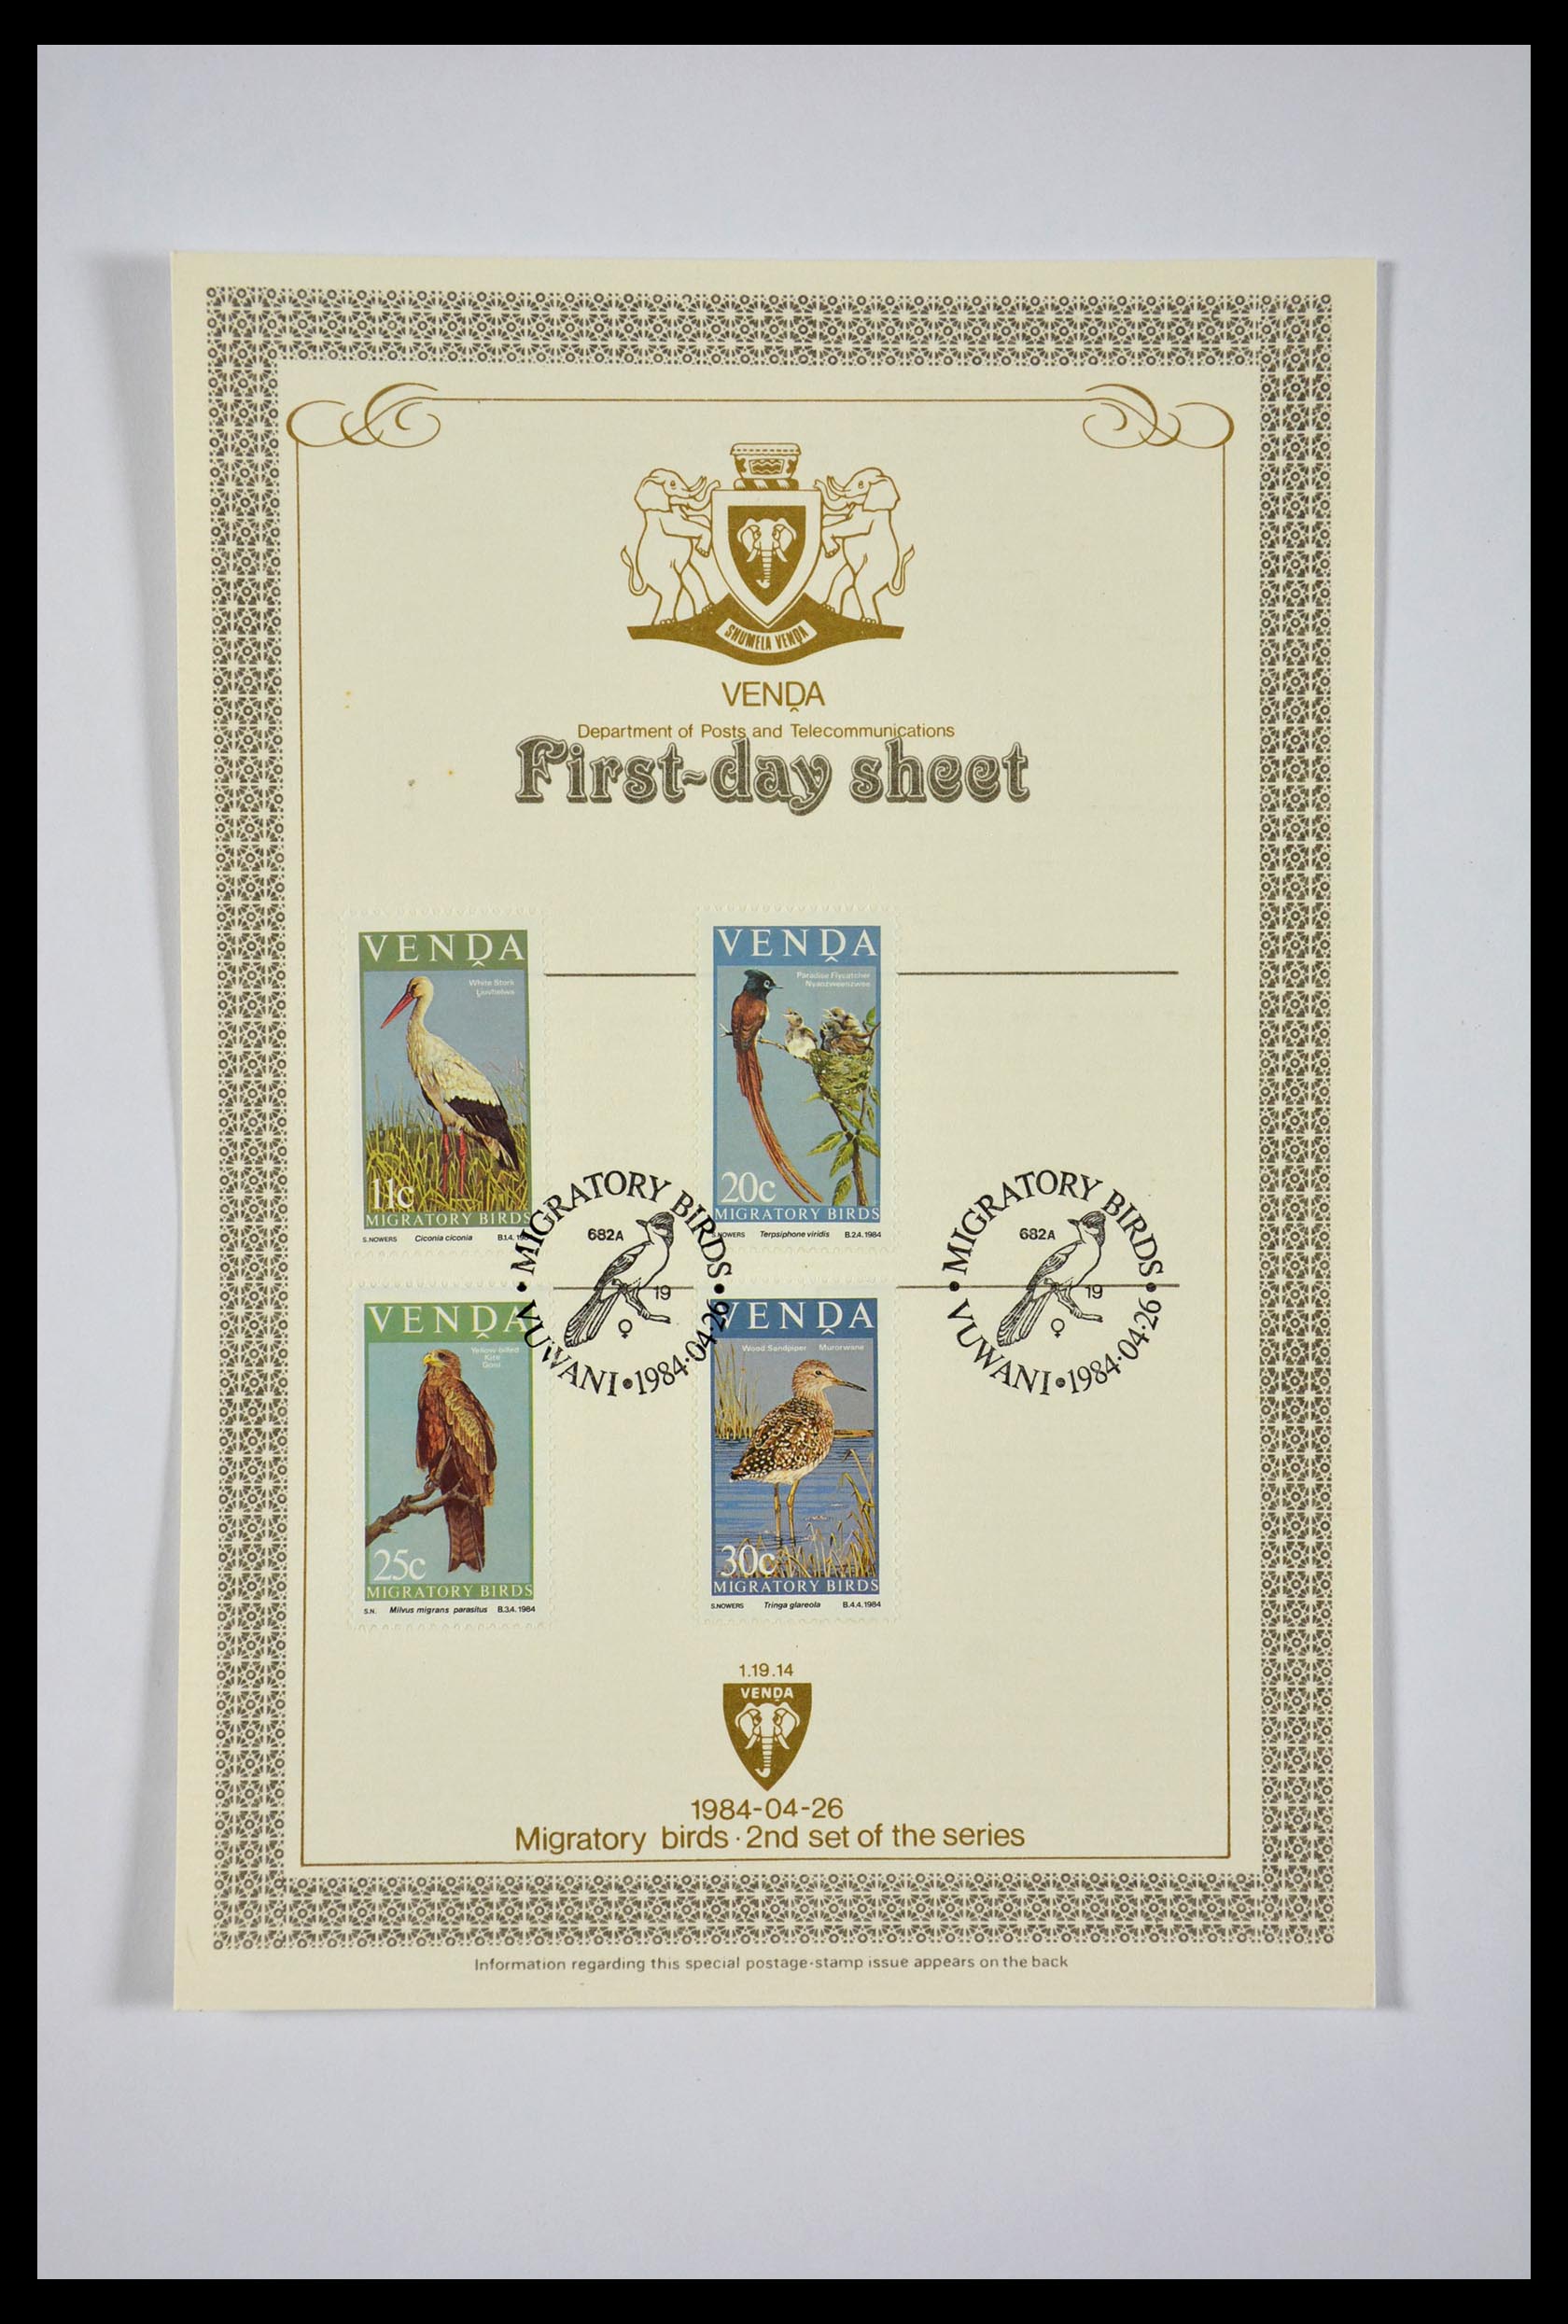 29356 050 - 29356 South Africa homelands first day covers 1979-1991.